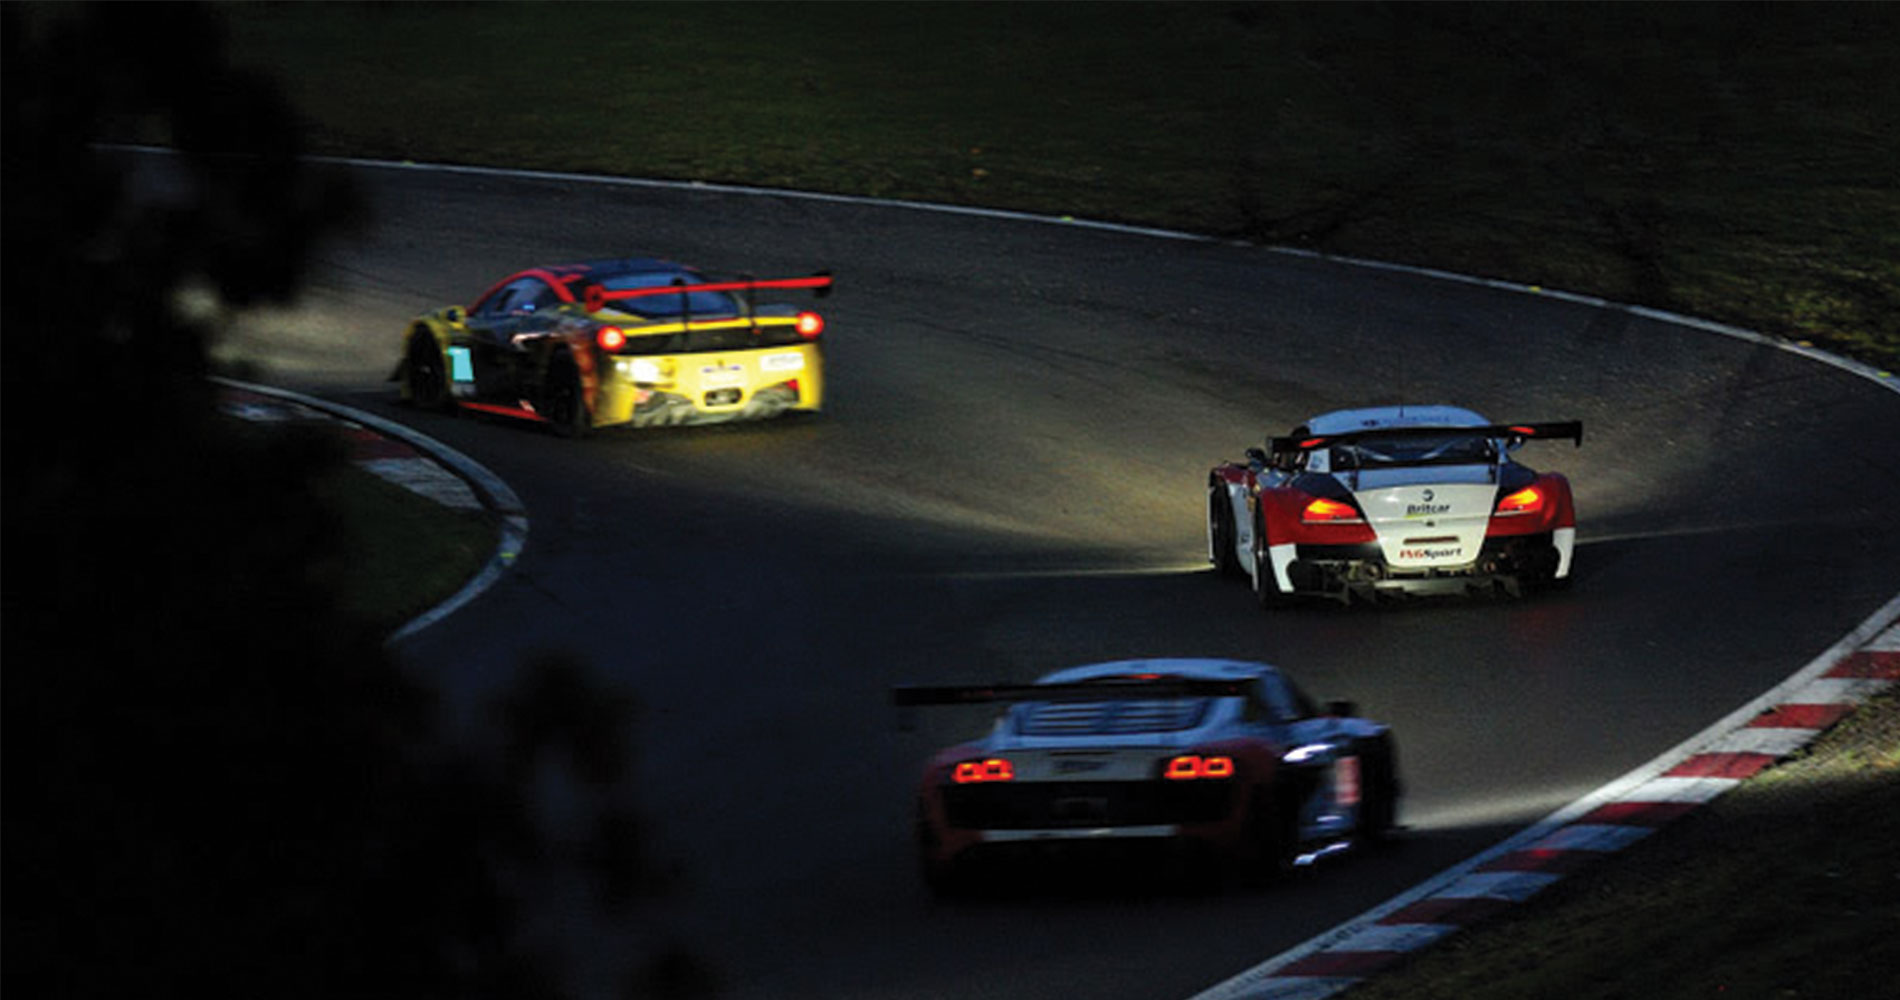 race-report-magnificent-duel-in-the-dark-motorsportdays-track-days-5